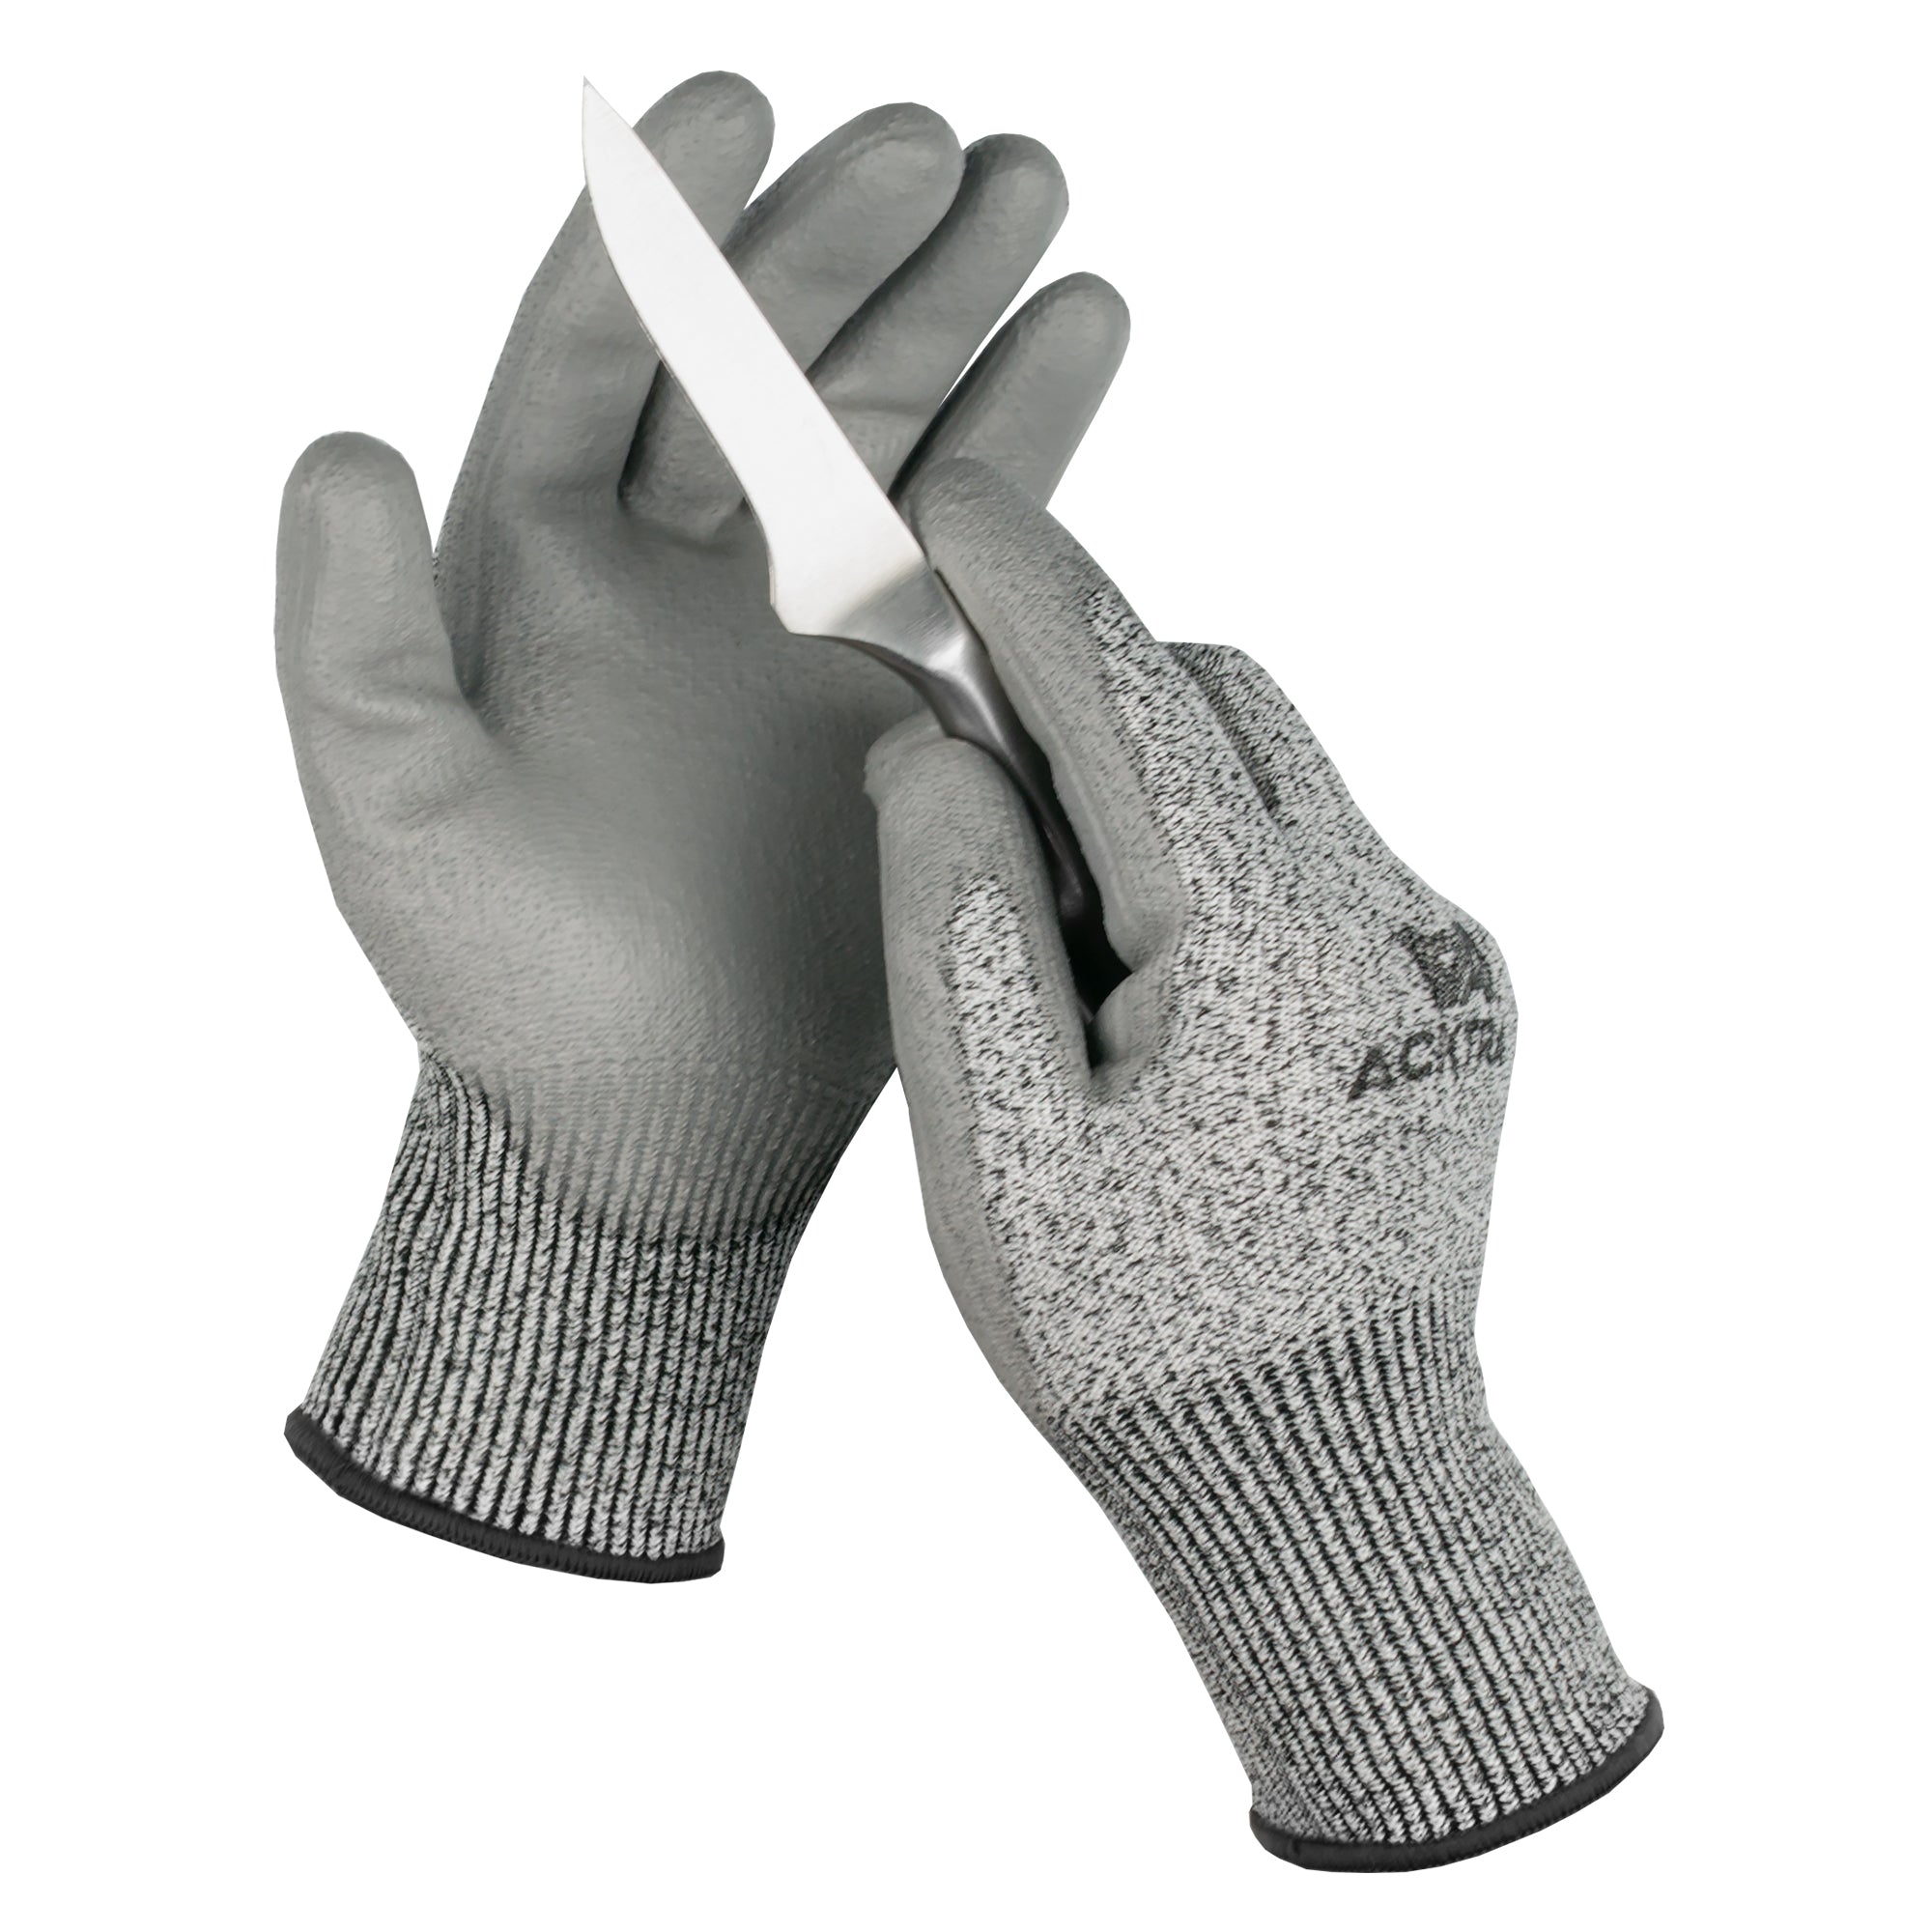 The science of cut-resistant gloves, 2019-08-25